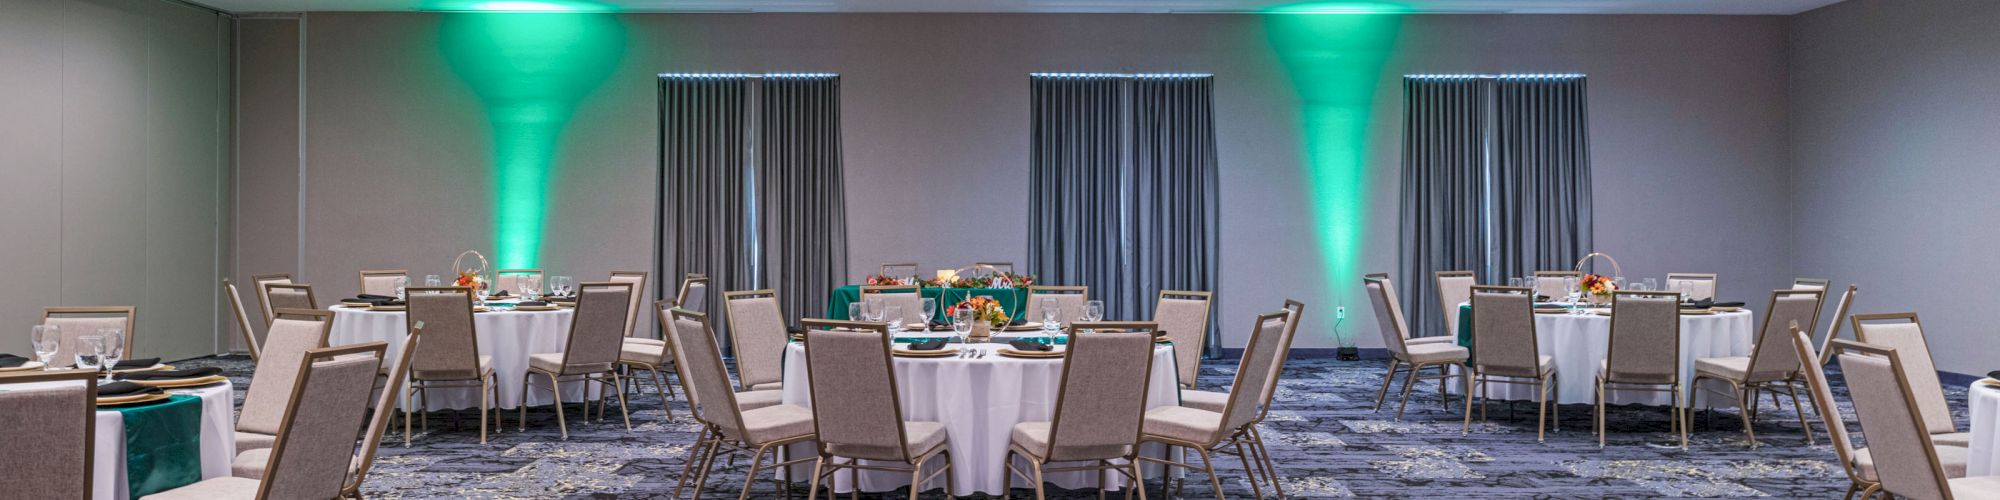 This image shows a decorated event room with round tables and chairs, subtle lighting, and green uplights on the walls.